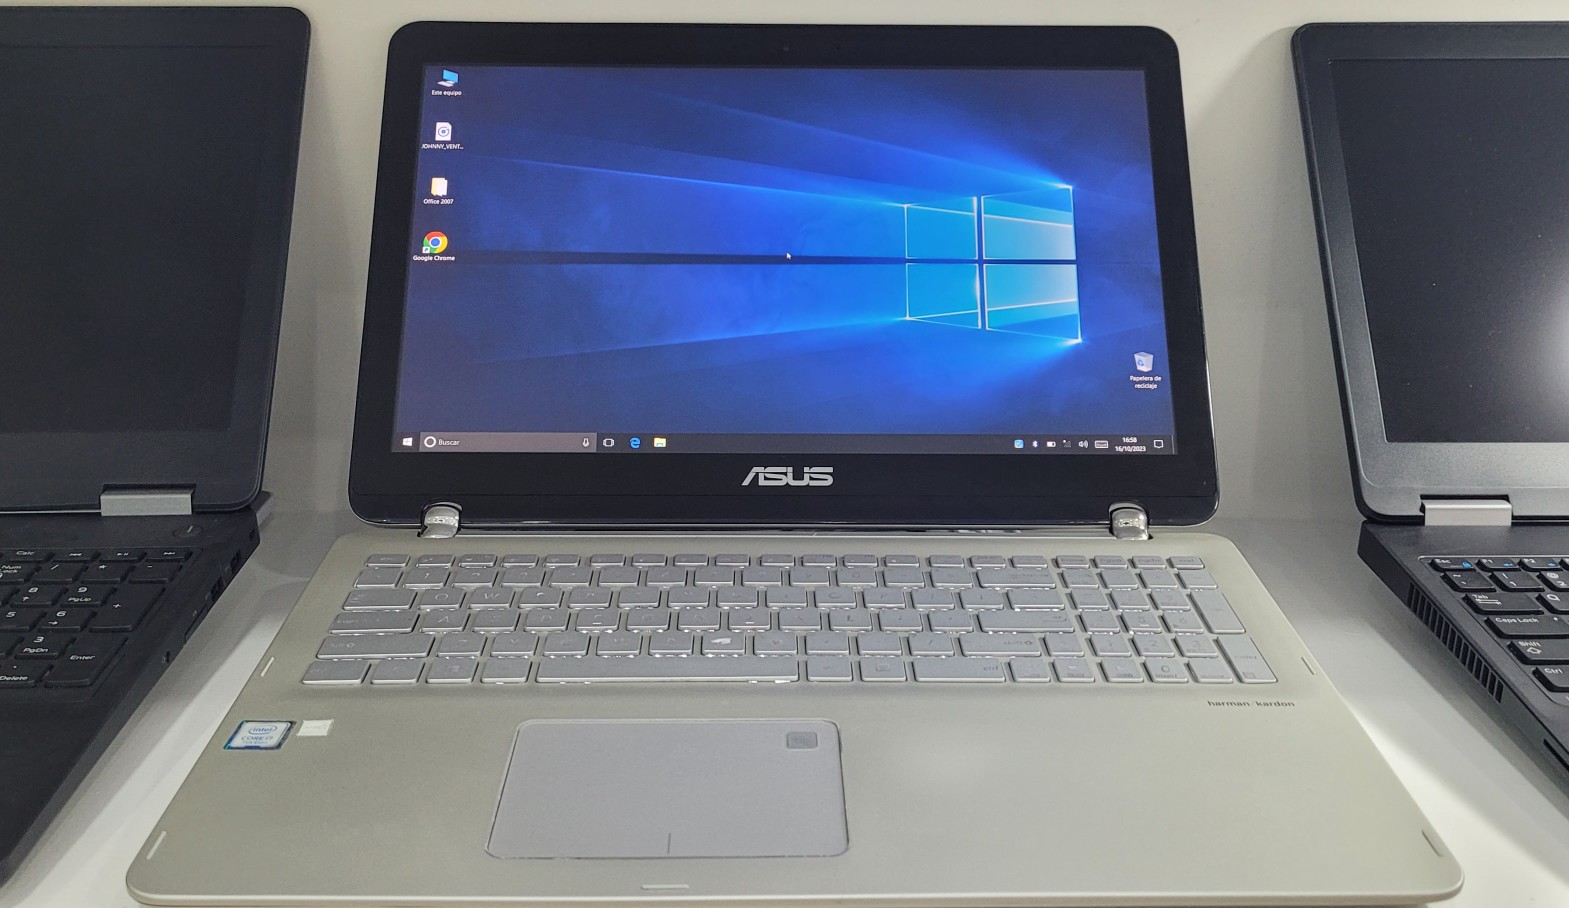 computadoras y laptops - Laptop Asus Touch 17 Pulg Core i7 2.90ghz Ram 16gb ddr4 Disco 512gb video 8gb